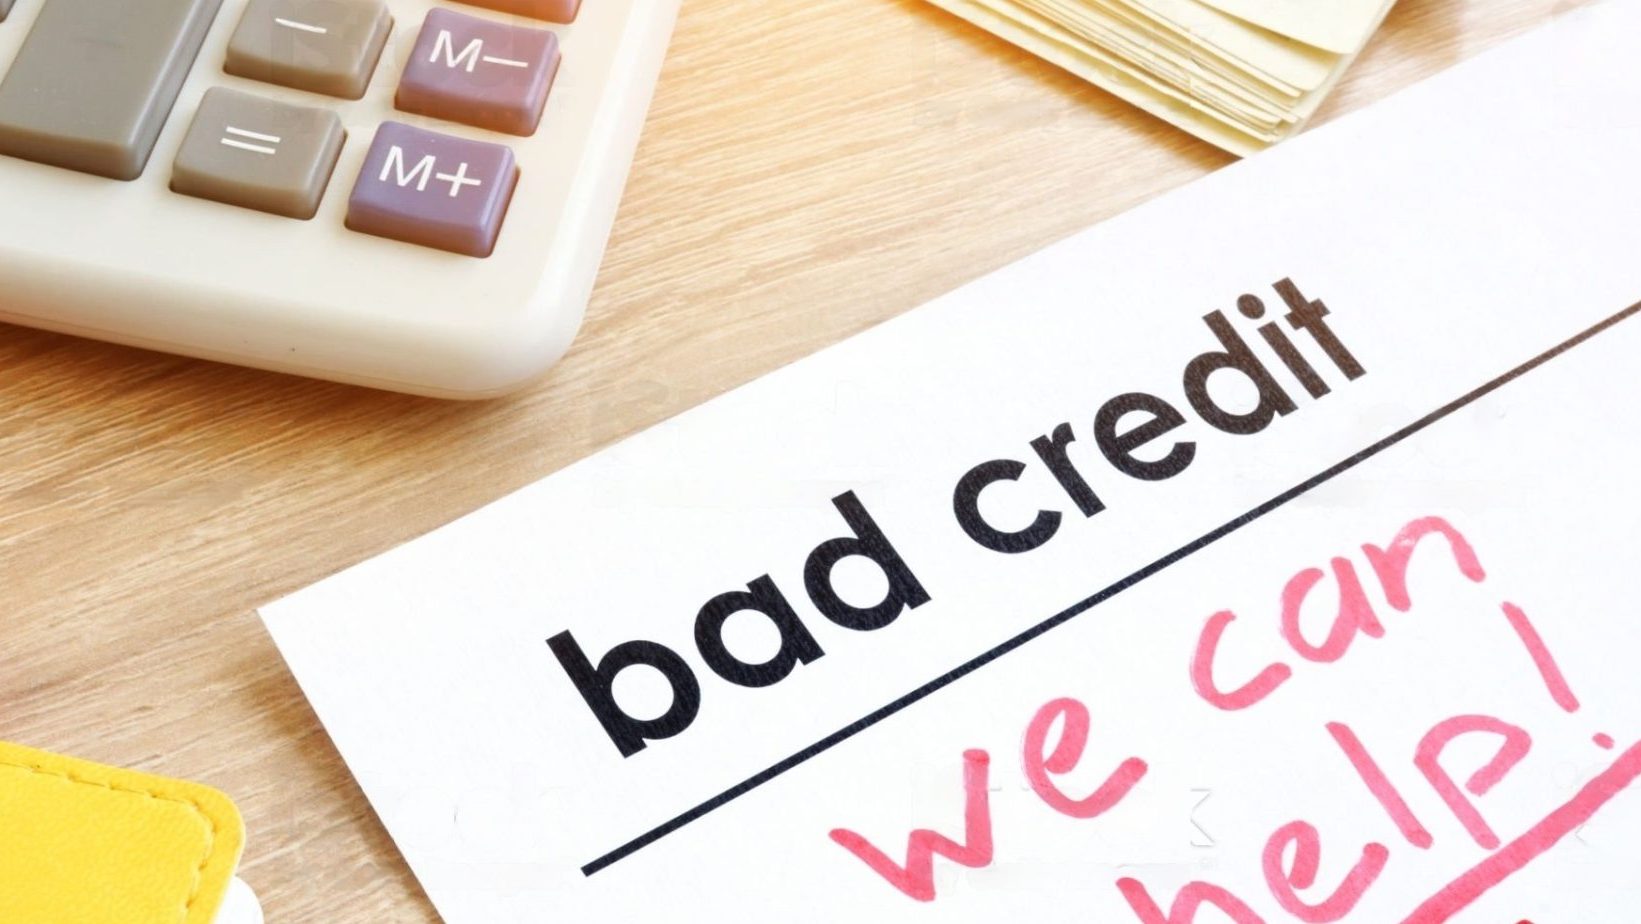 Bad Credit Doesn’t Need to Stop You From Accepting Credit Cards